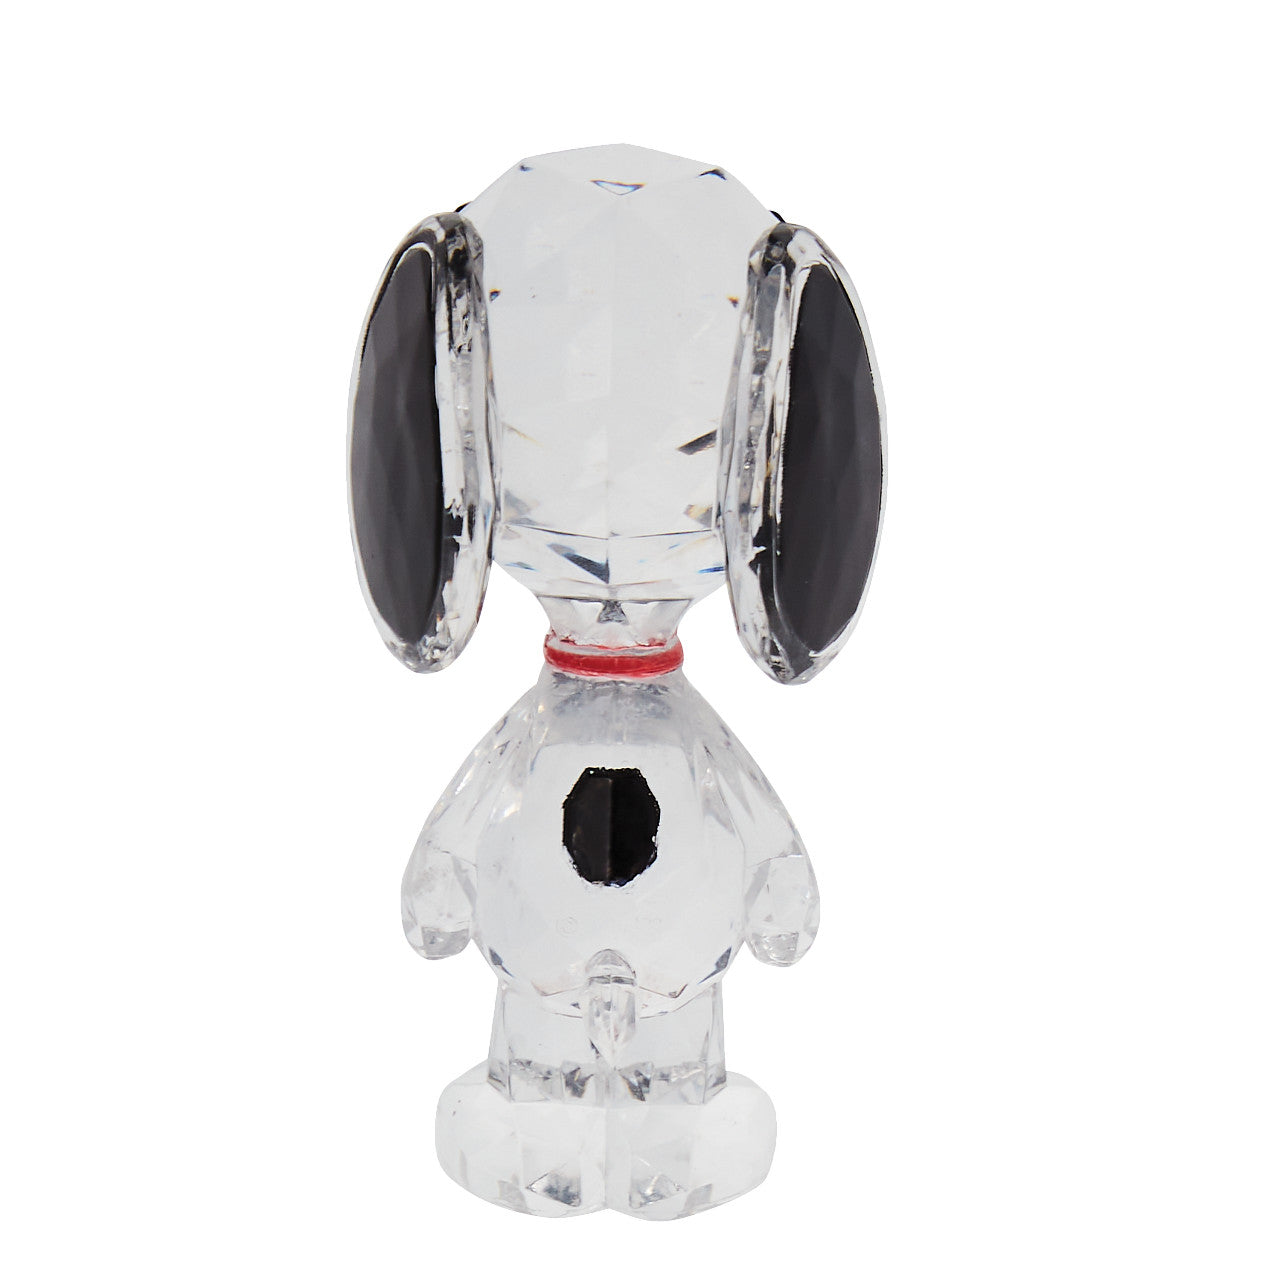 Snoopy Facets Figurine